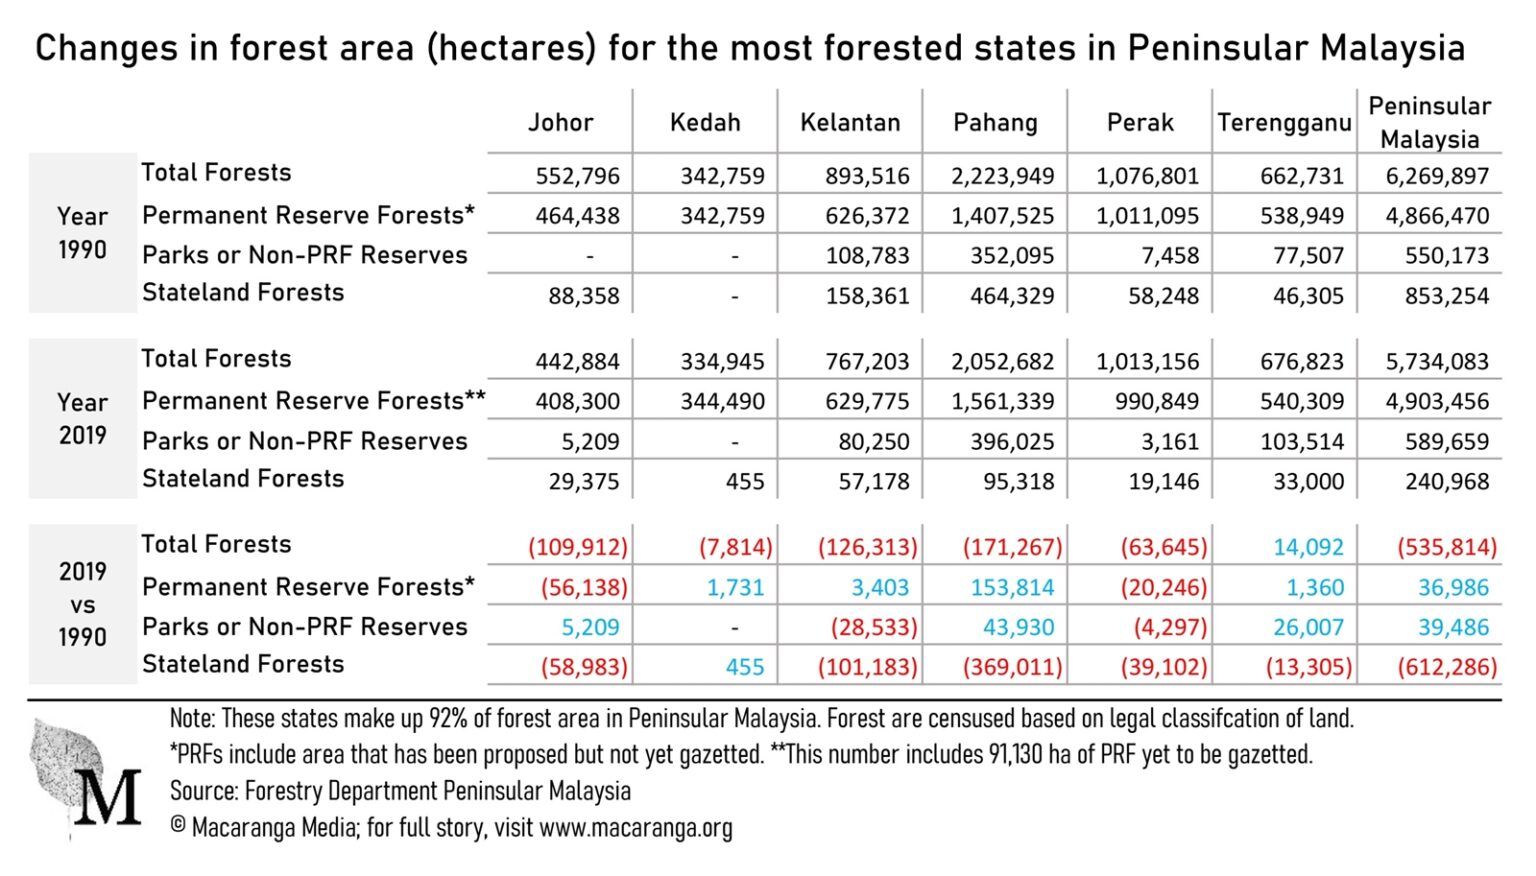 Table 1: States have often excised and expanded permanent reserve forests. Table courtesy of Macarenga.